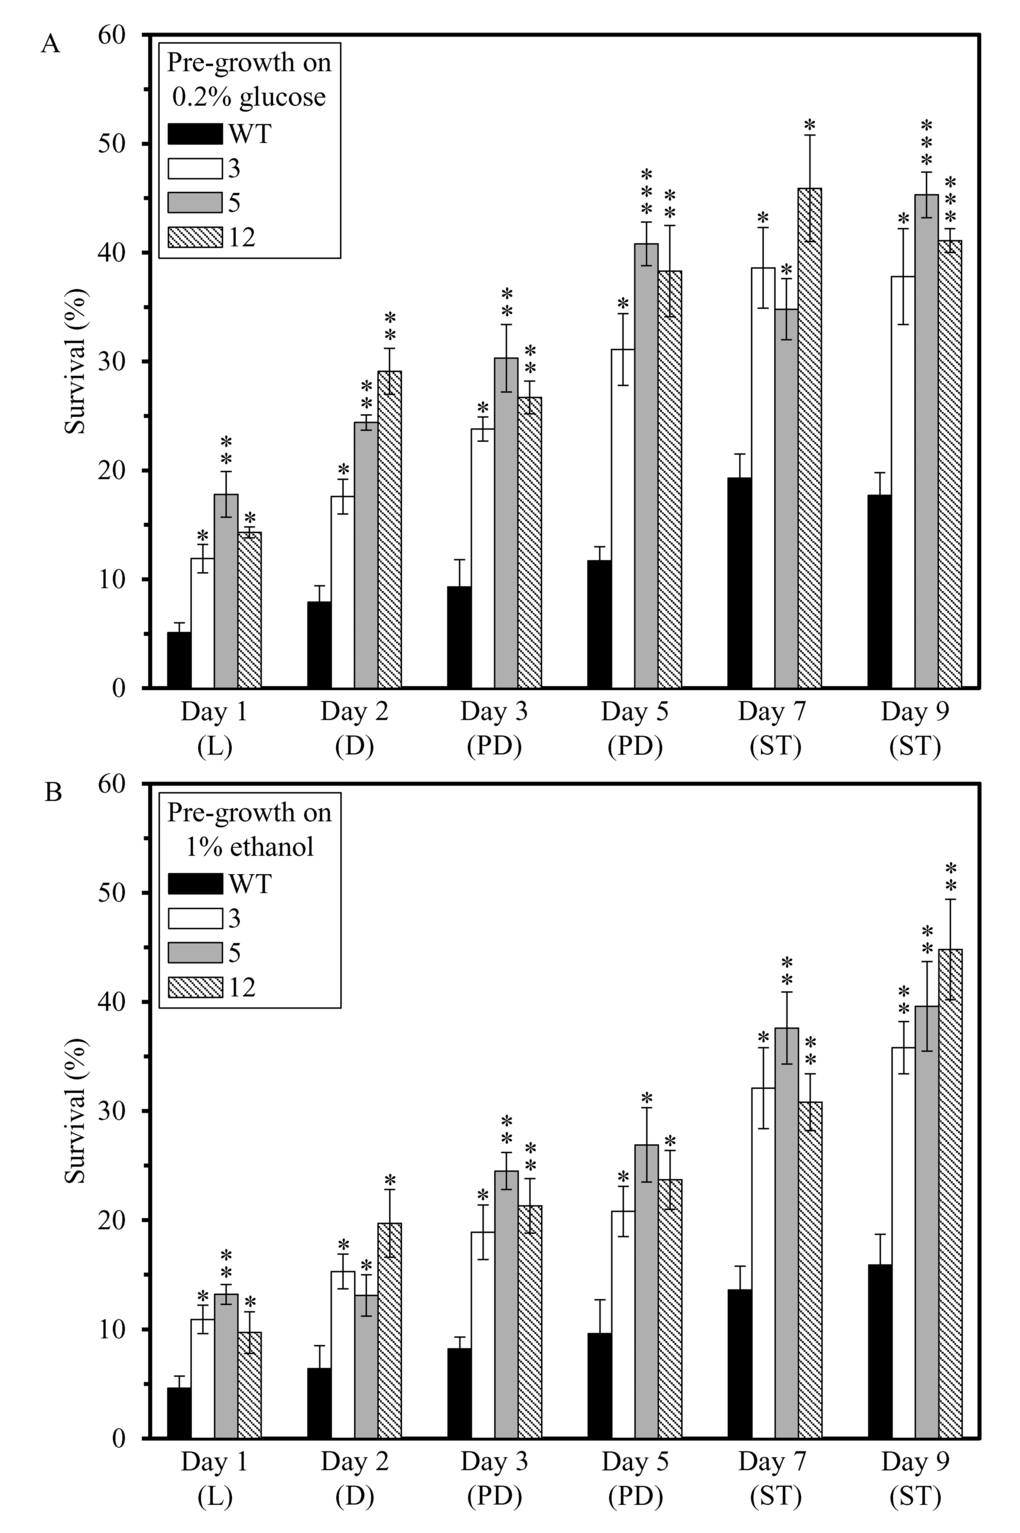 The long-lived mutant strains 3, 5 and 12 exhibit enhanced (as compared to the parental WT strain) susceptibilities to a mitochondria-controlled apoptotic form of cell death, one of the traits of early-life fitness. The parental WT strain BY4742 and long-lived mutant strains 3, 5 and 12 (each in the BY4742 genetic background) were cultured in YP medium initially containing 0.2% glucose (a fermentable carbon source; CR conditions) (A) or 1% ethanol (a non-fermentable carbon source) (B). Cell aliquots were recovered from various growth phases and then treated for 2 h with 2.5 mM hydrogen peroxide to induce mitochondria-controlled apoptosis. The % of viable cells was calculated as described in in the ″Materials and methods″ section. D, diauxic growth phase; L, logarithmic growth phase; PD, post-diauxic growth phase; ST, stationary growth phase. Data originate are presented as means ± SEM (n = 3; *p p 